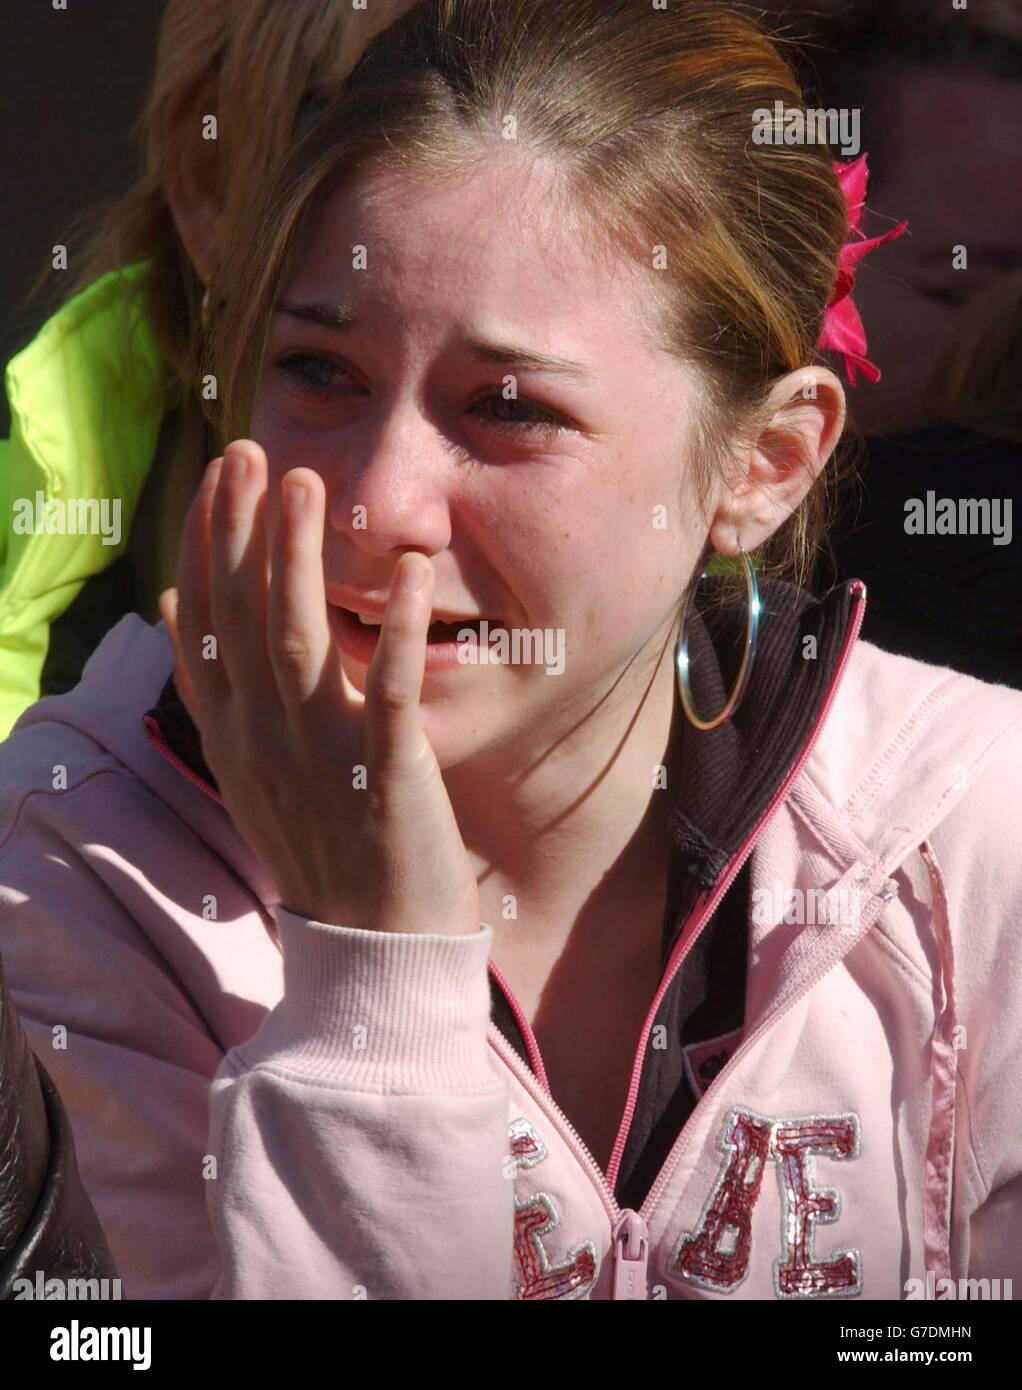 A young fan gets emotional as Irish pop group Westlife announce their new 2005 arena tour at Wembley Arena Paviliion in north London. They will be the first band to play at the temporary structure which will be used for shows while wembley arena is being refurbished. Stock Photo